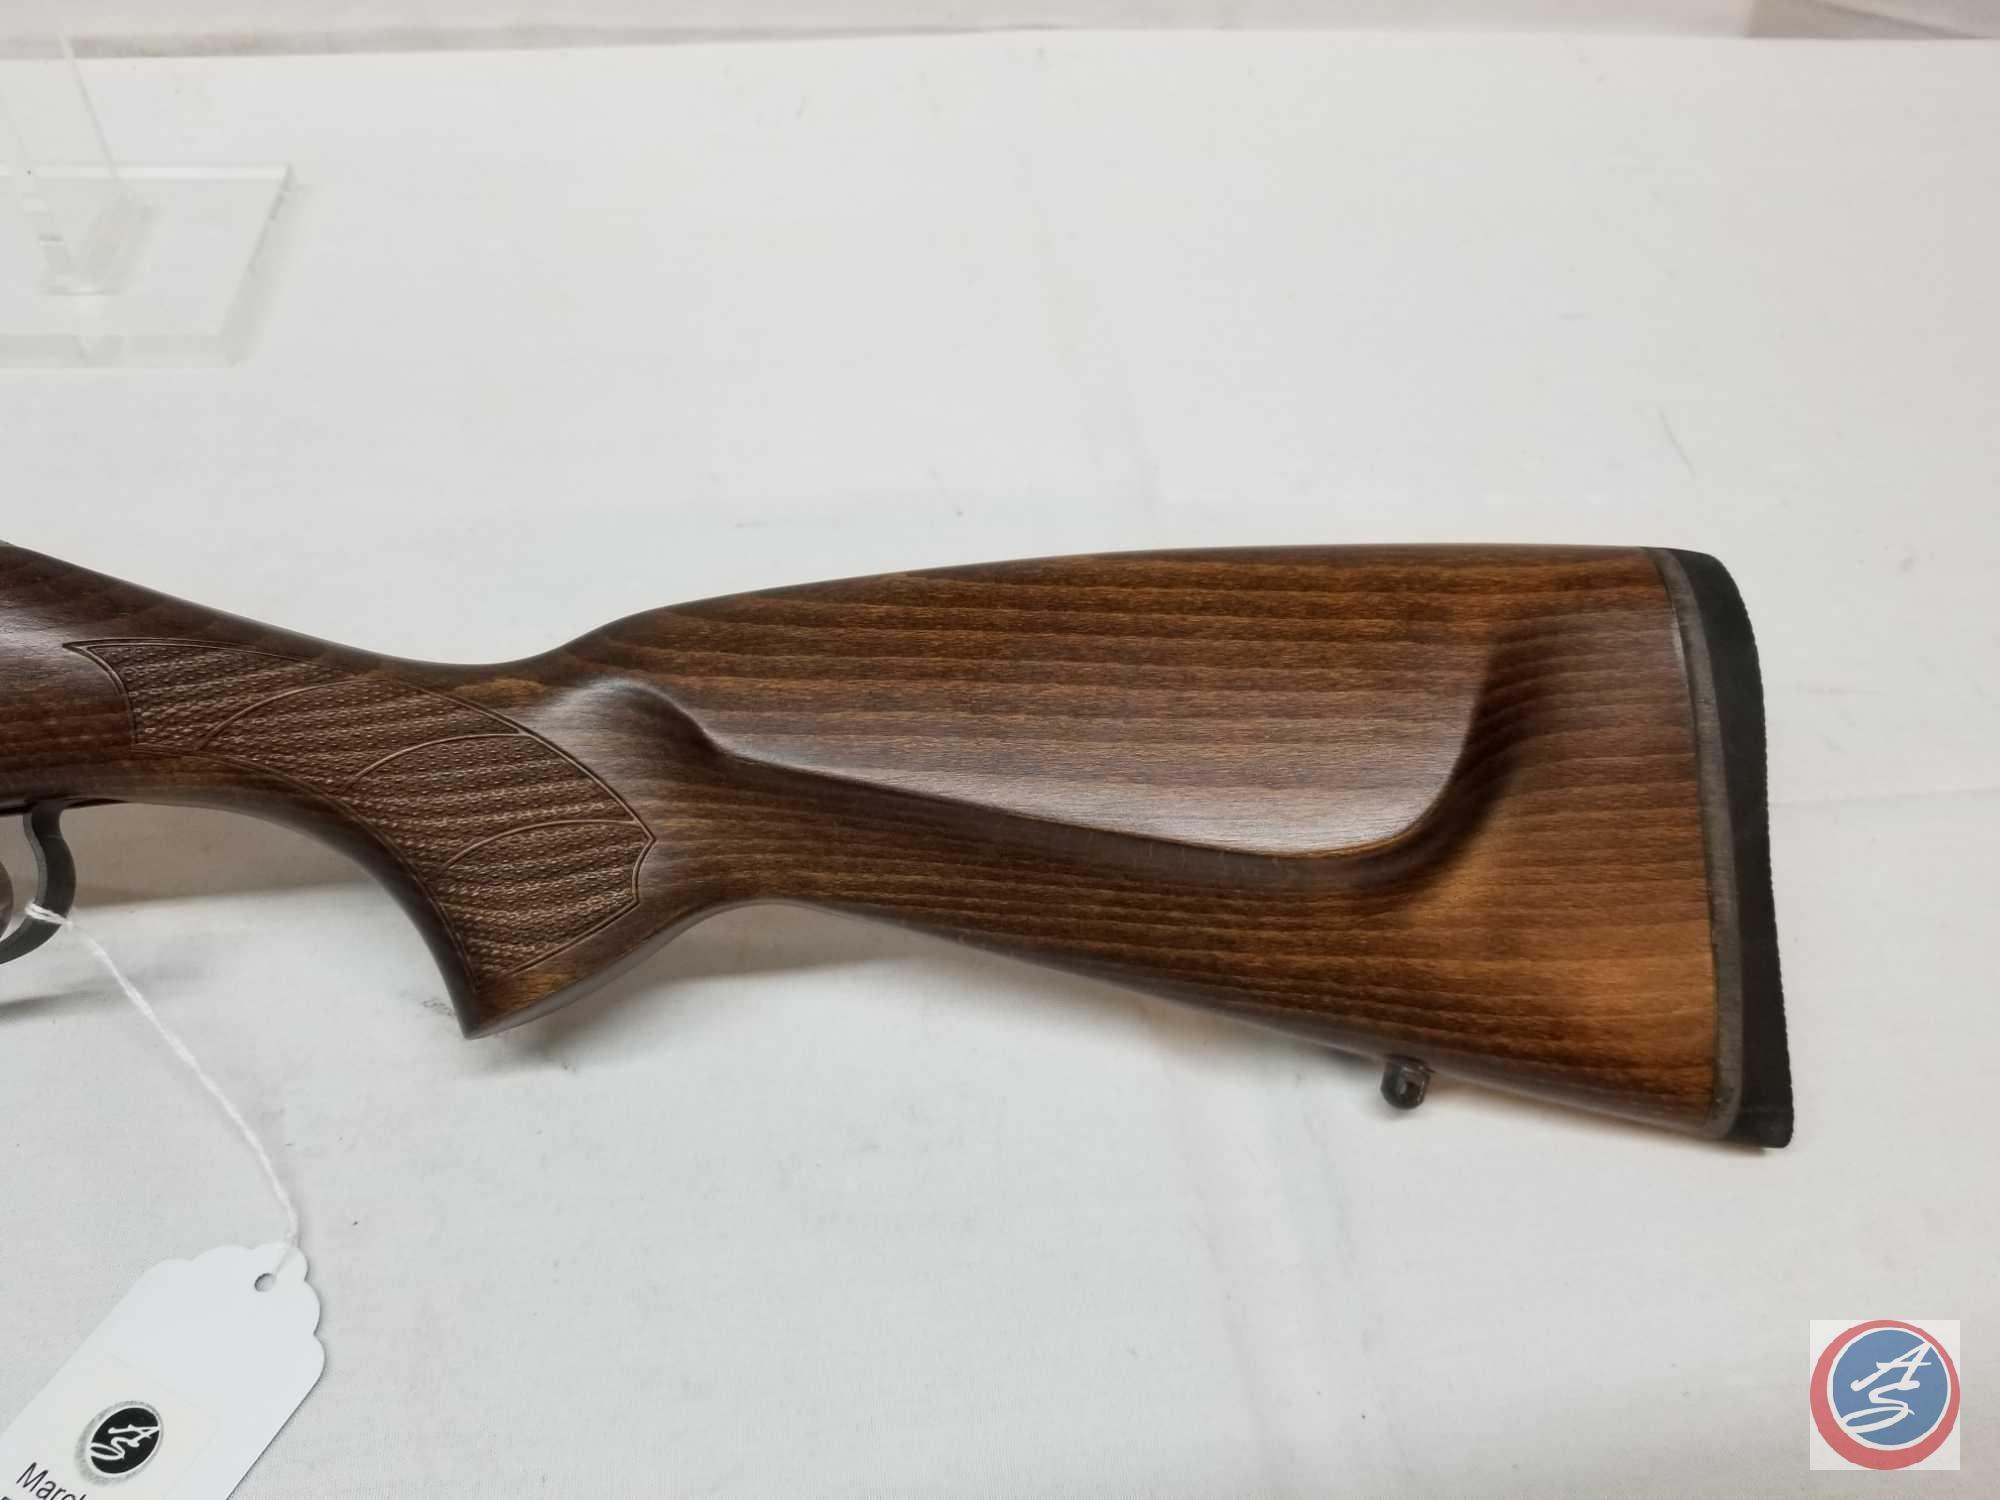 CZ Model 455 Ultra Lux 22 LR Rifle Bolt Action Rifle New in Box Ser # B703754